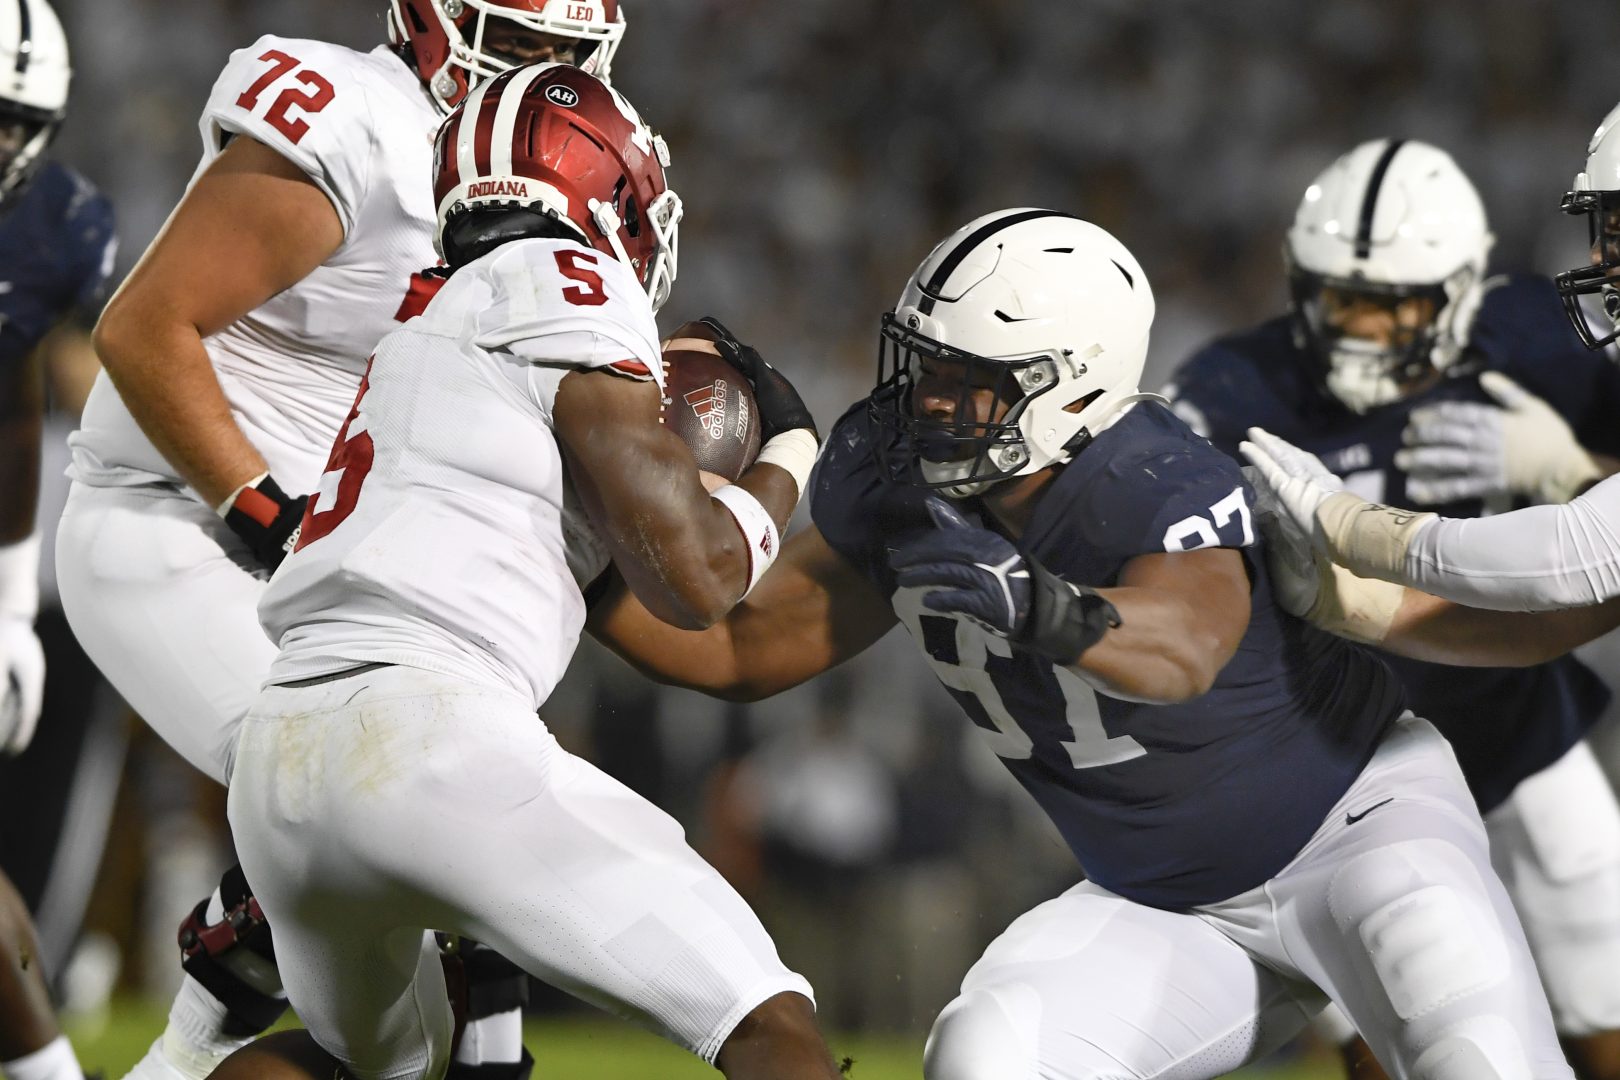 Penn State defensive tackle PJ Mustipher (97) tackles Indiana running back Stephen Carr (5) in the first half of their NCAA college football game in State College, Pa., on Saturday, Oct. 2, 2021. 